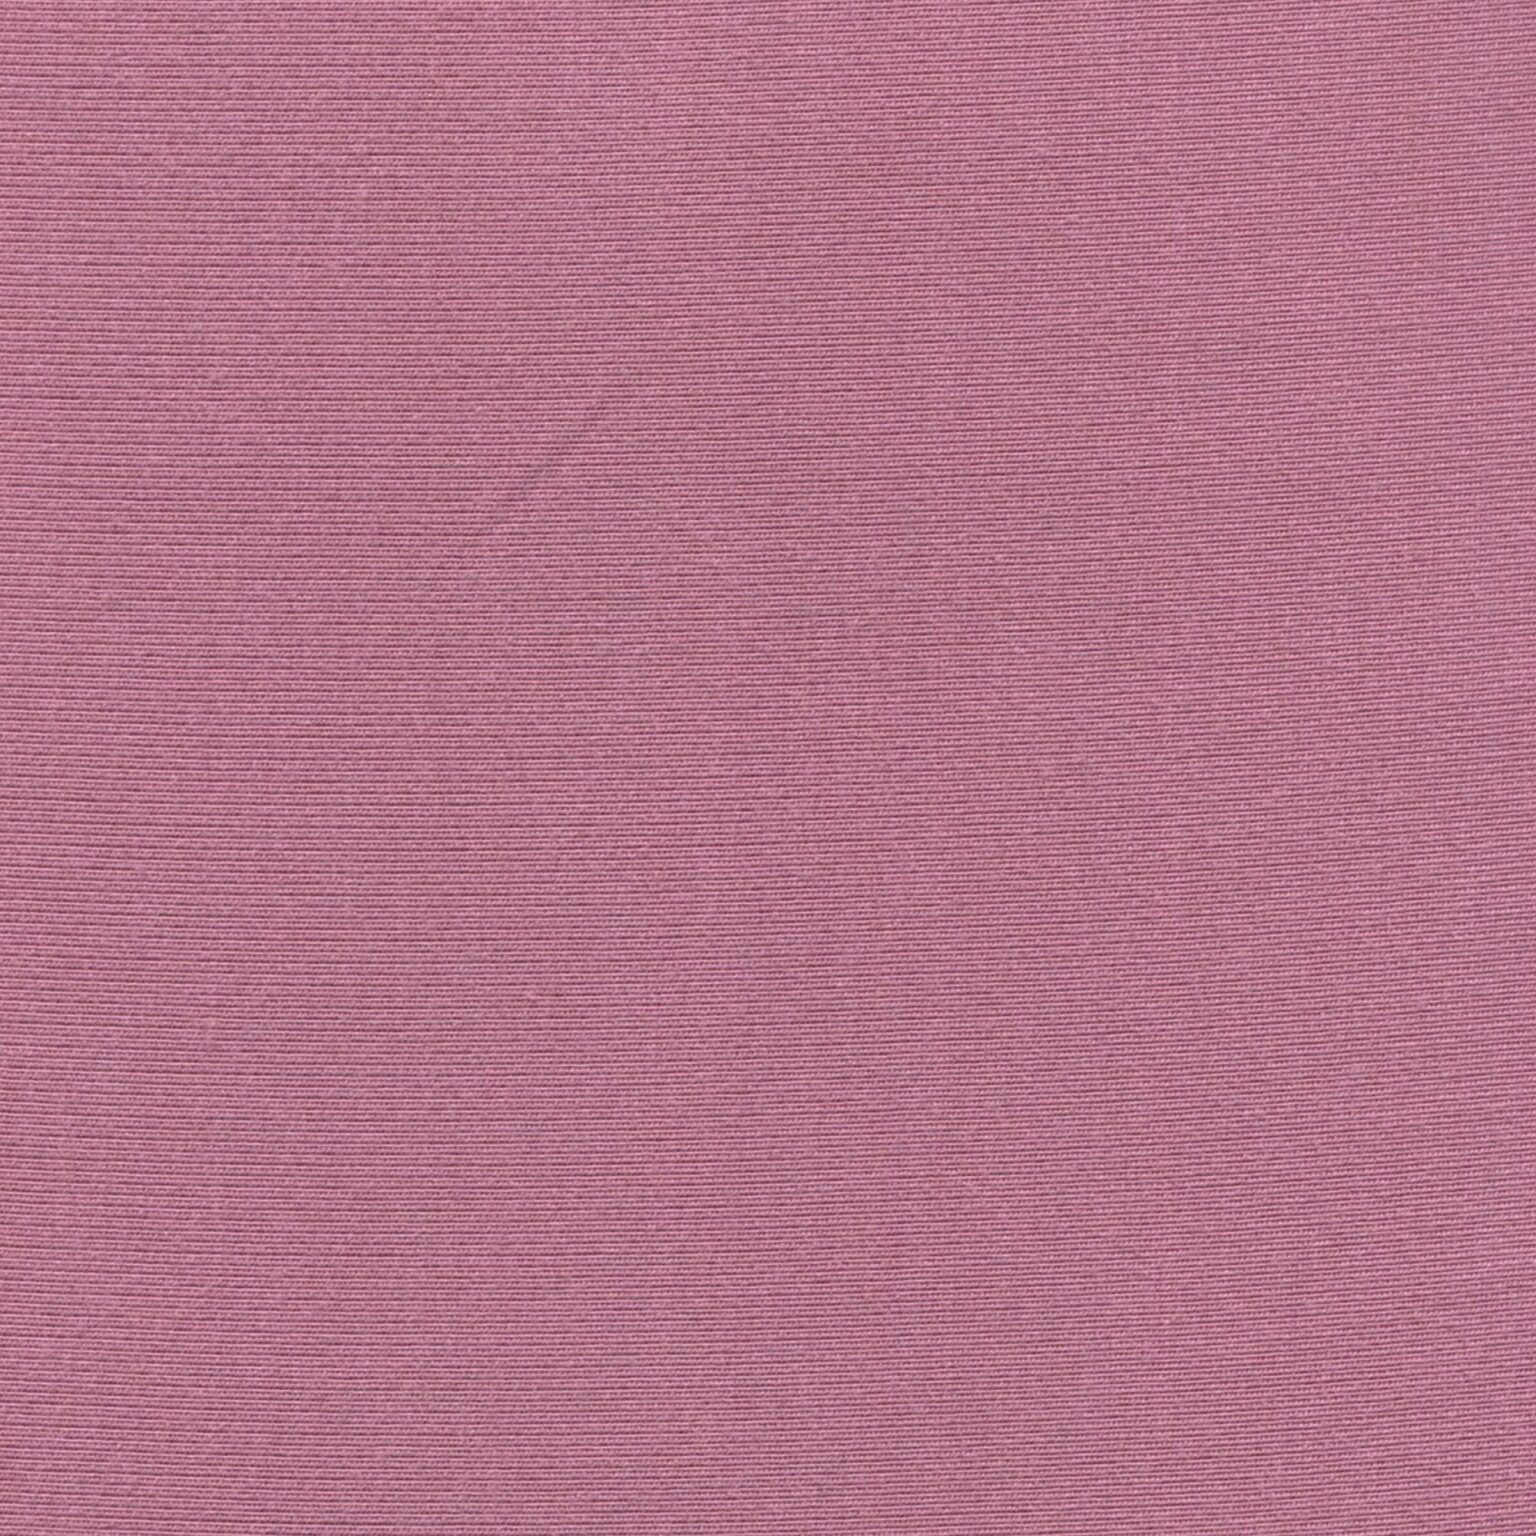 Dusky Pink Bamboo Organic French Terry fabric | More Sewing